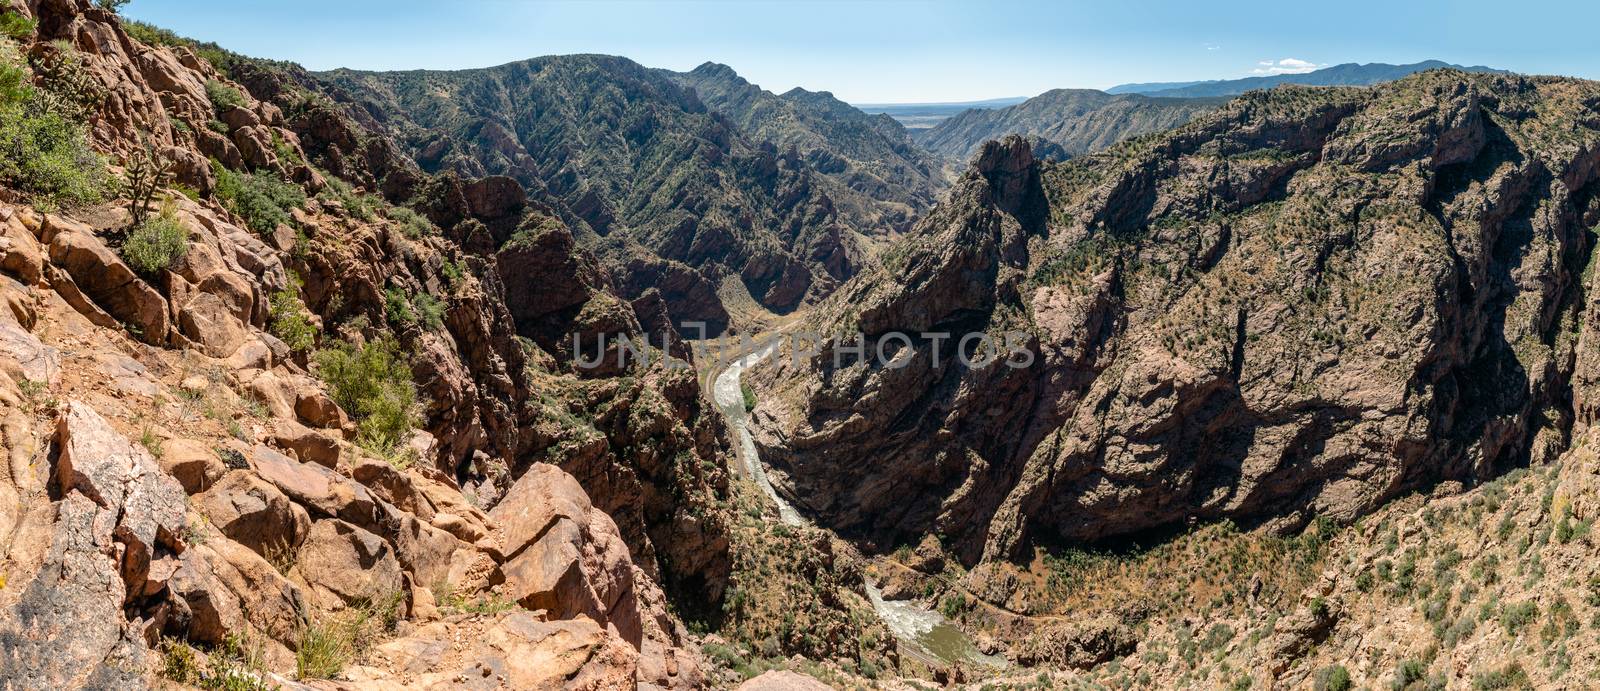 Panorama of Royal Gorge in Canon City, Colorado by Njean